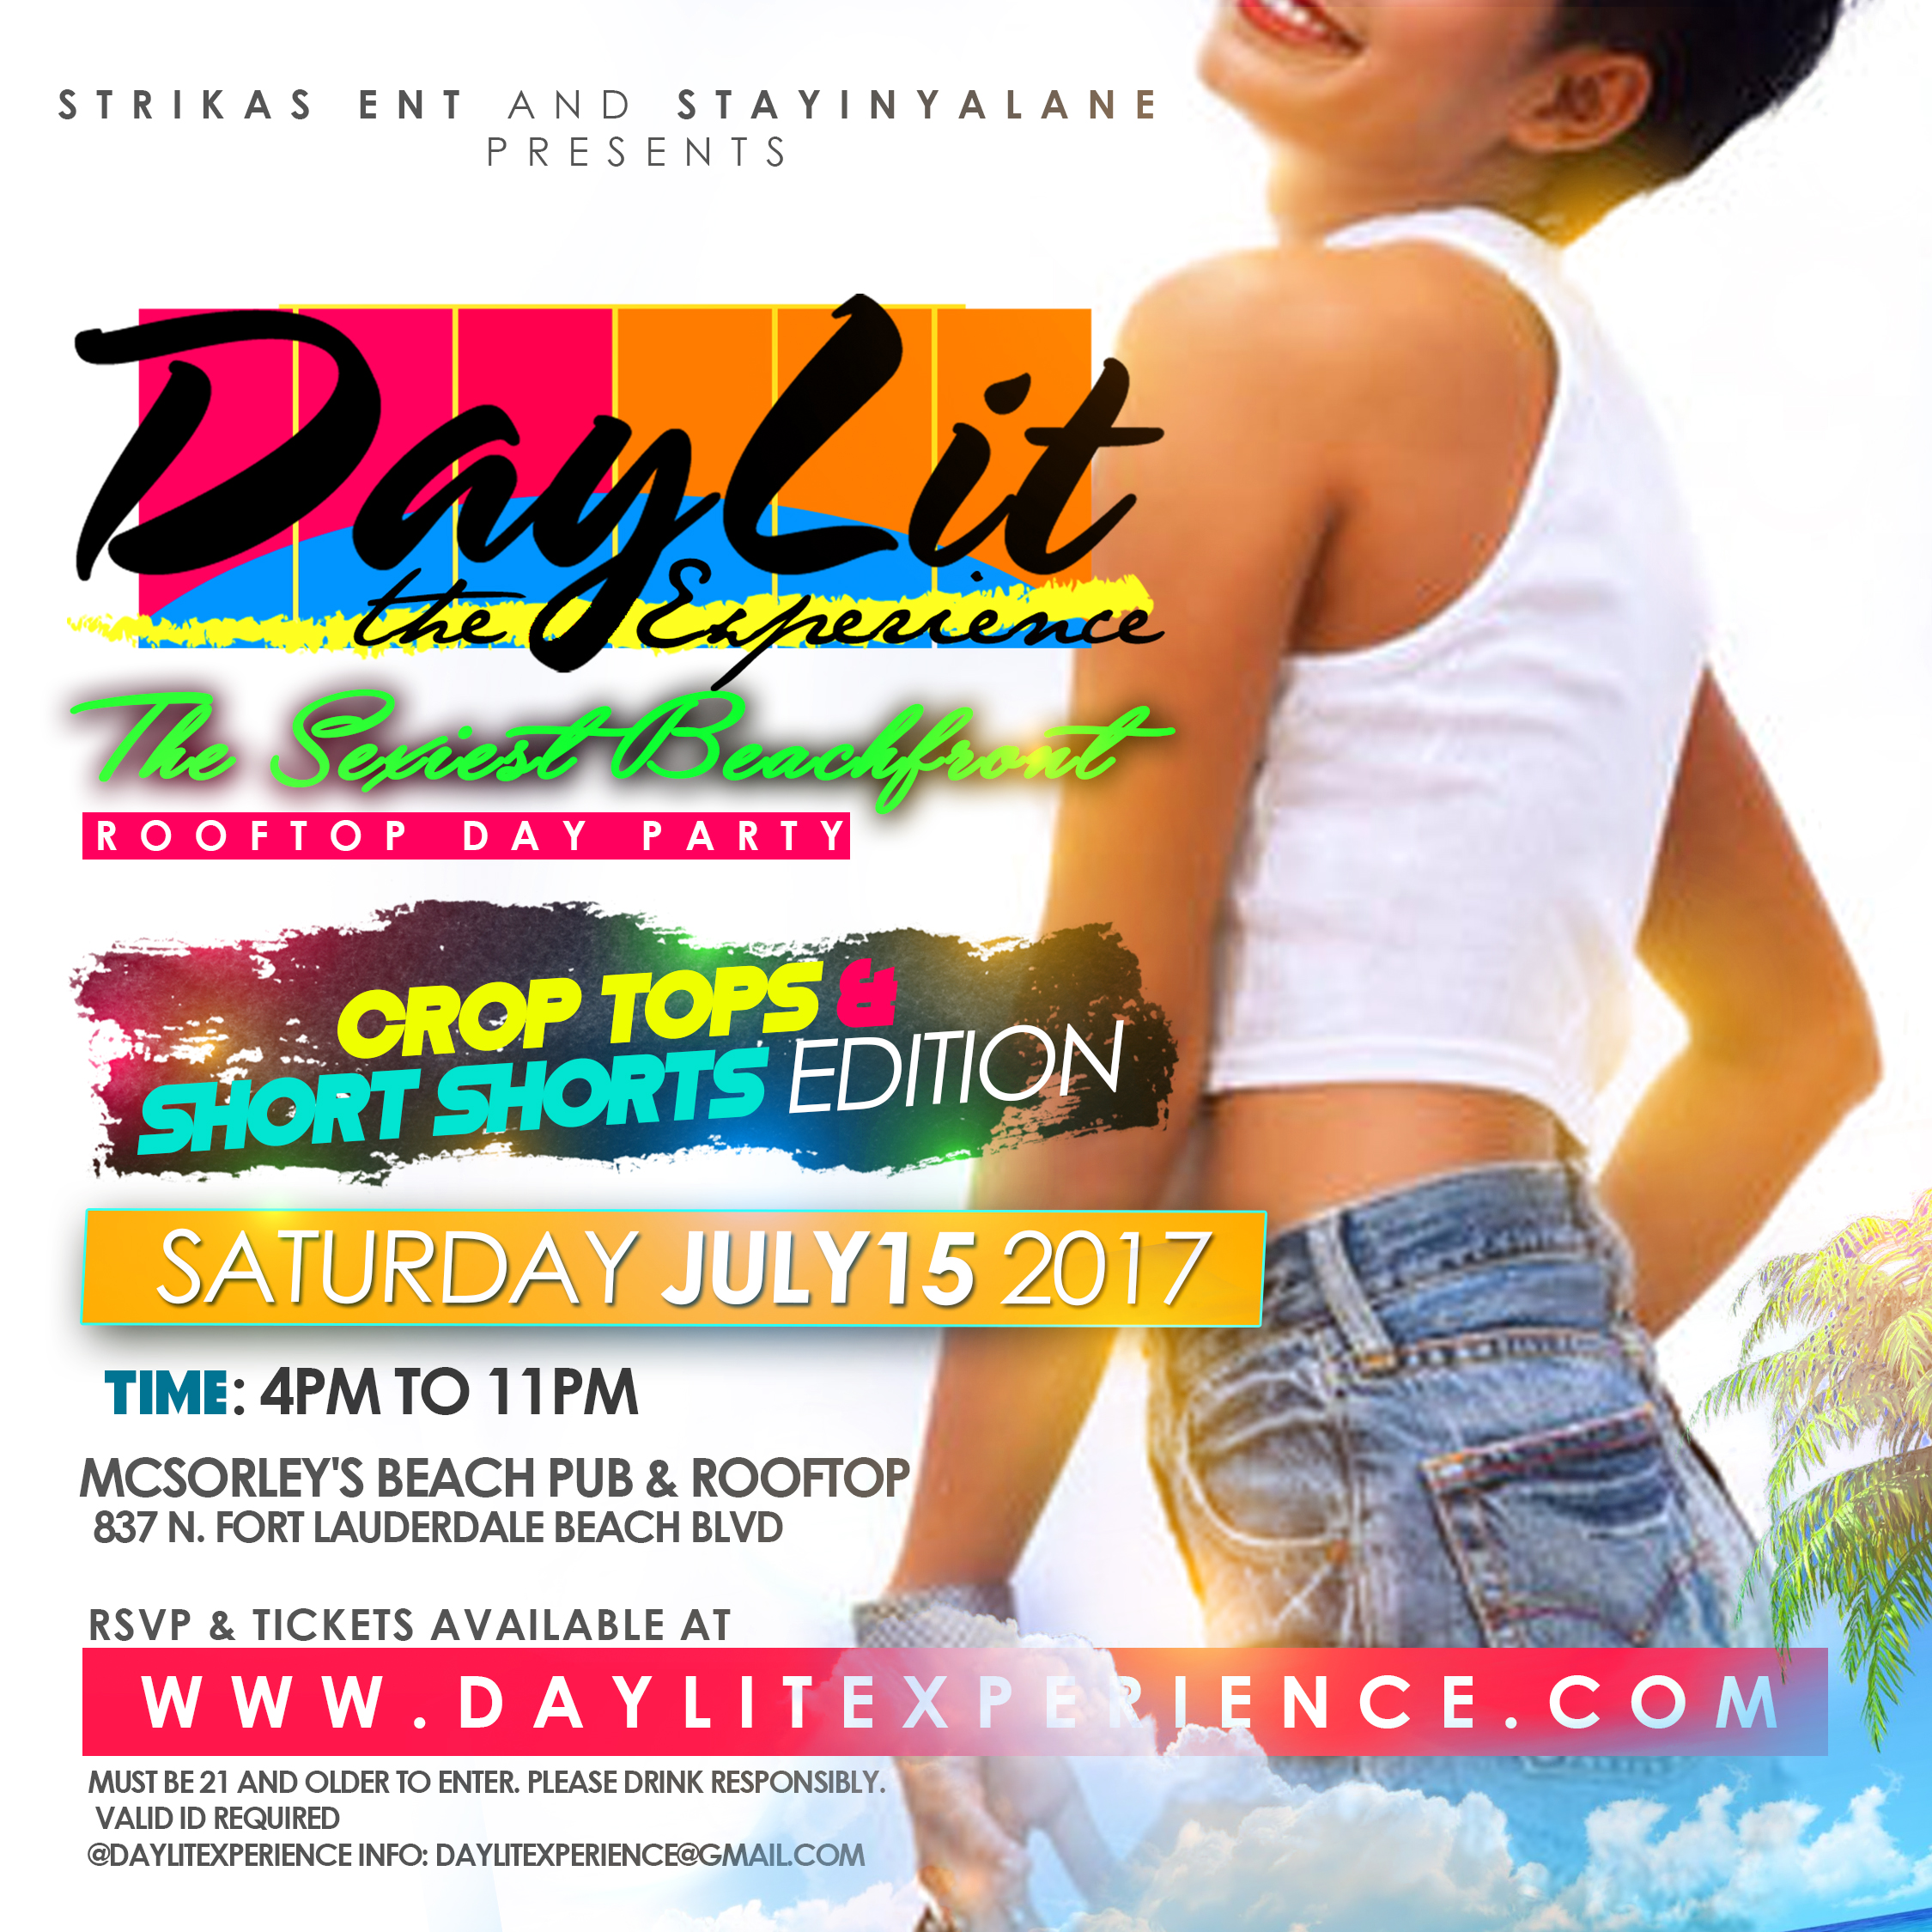 DayLit 7-15-2017 featuring Mr. Magnum, DJing in Ft. Lauderdale at McSorley's Beach Pub. Rooftop day party.